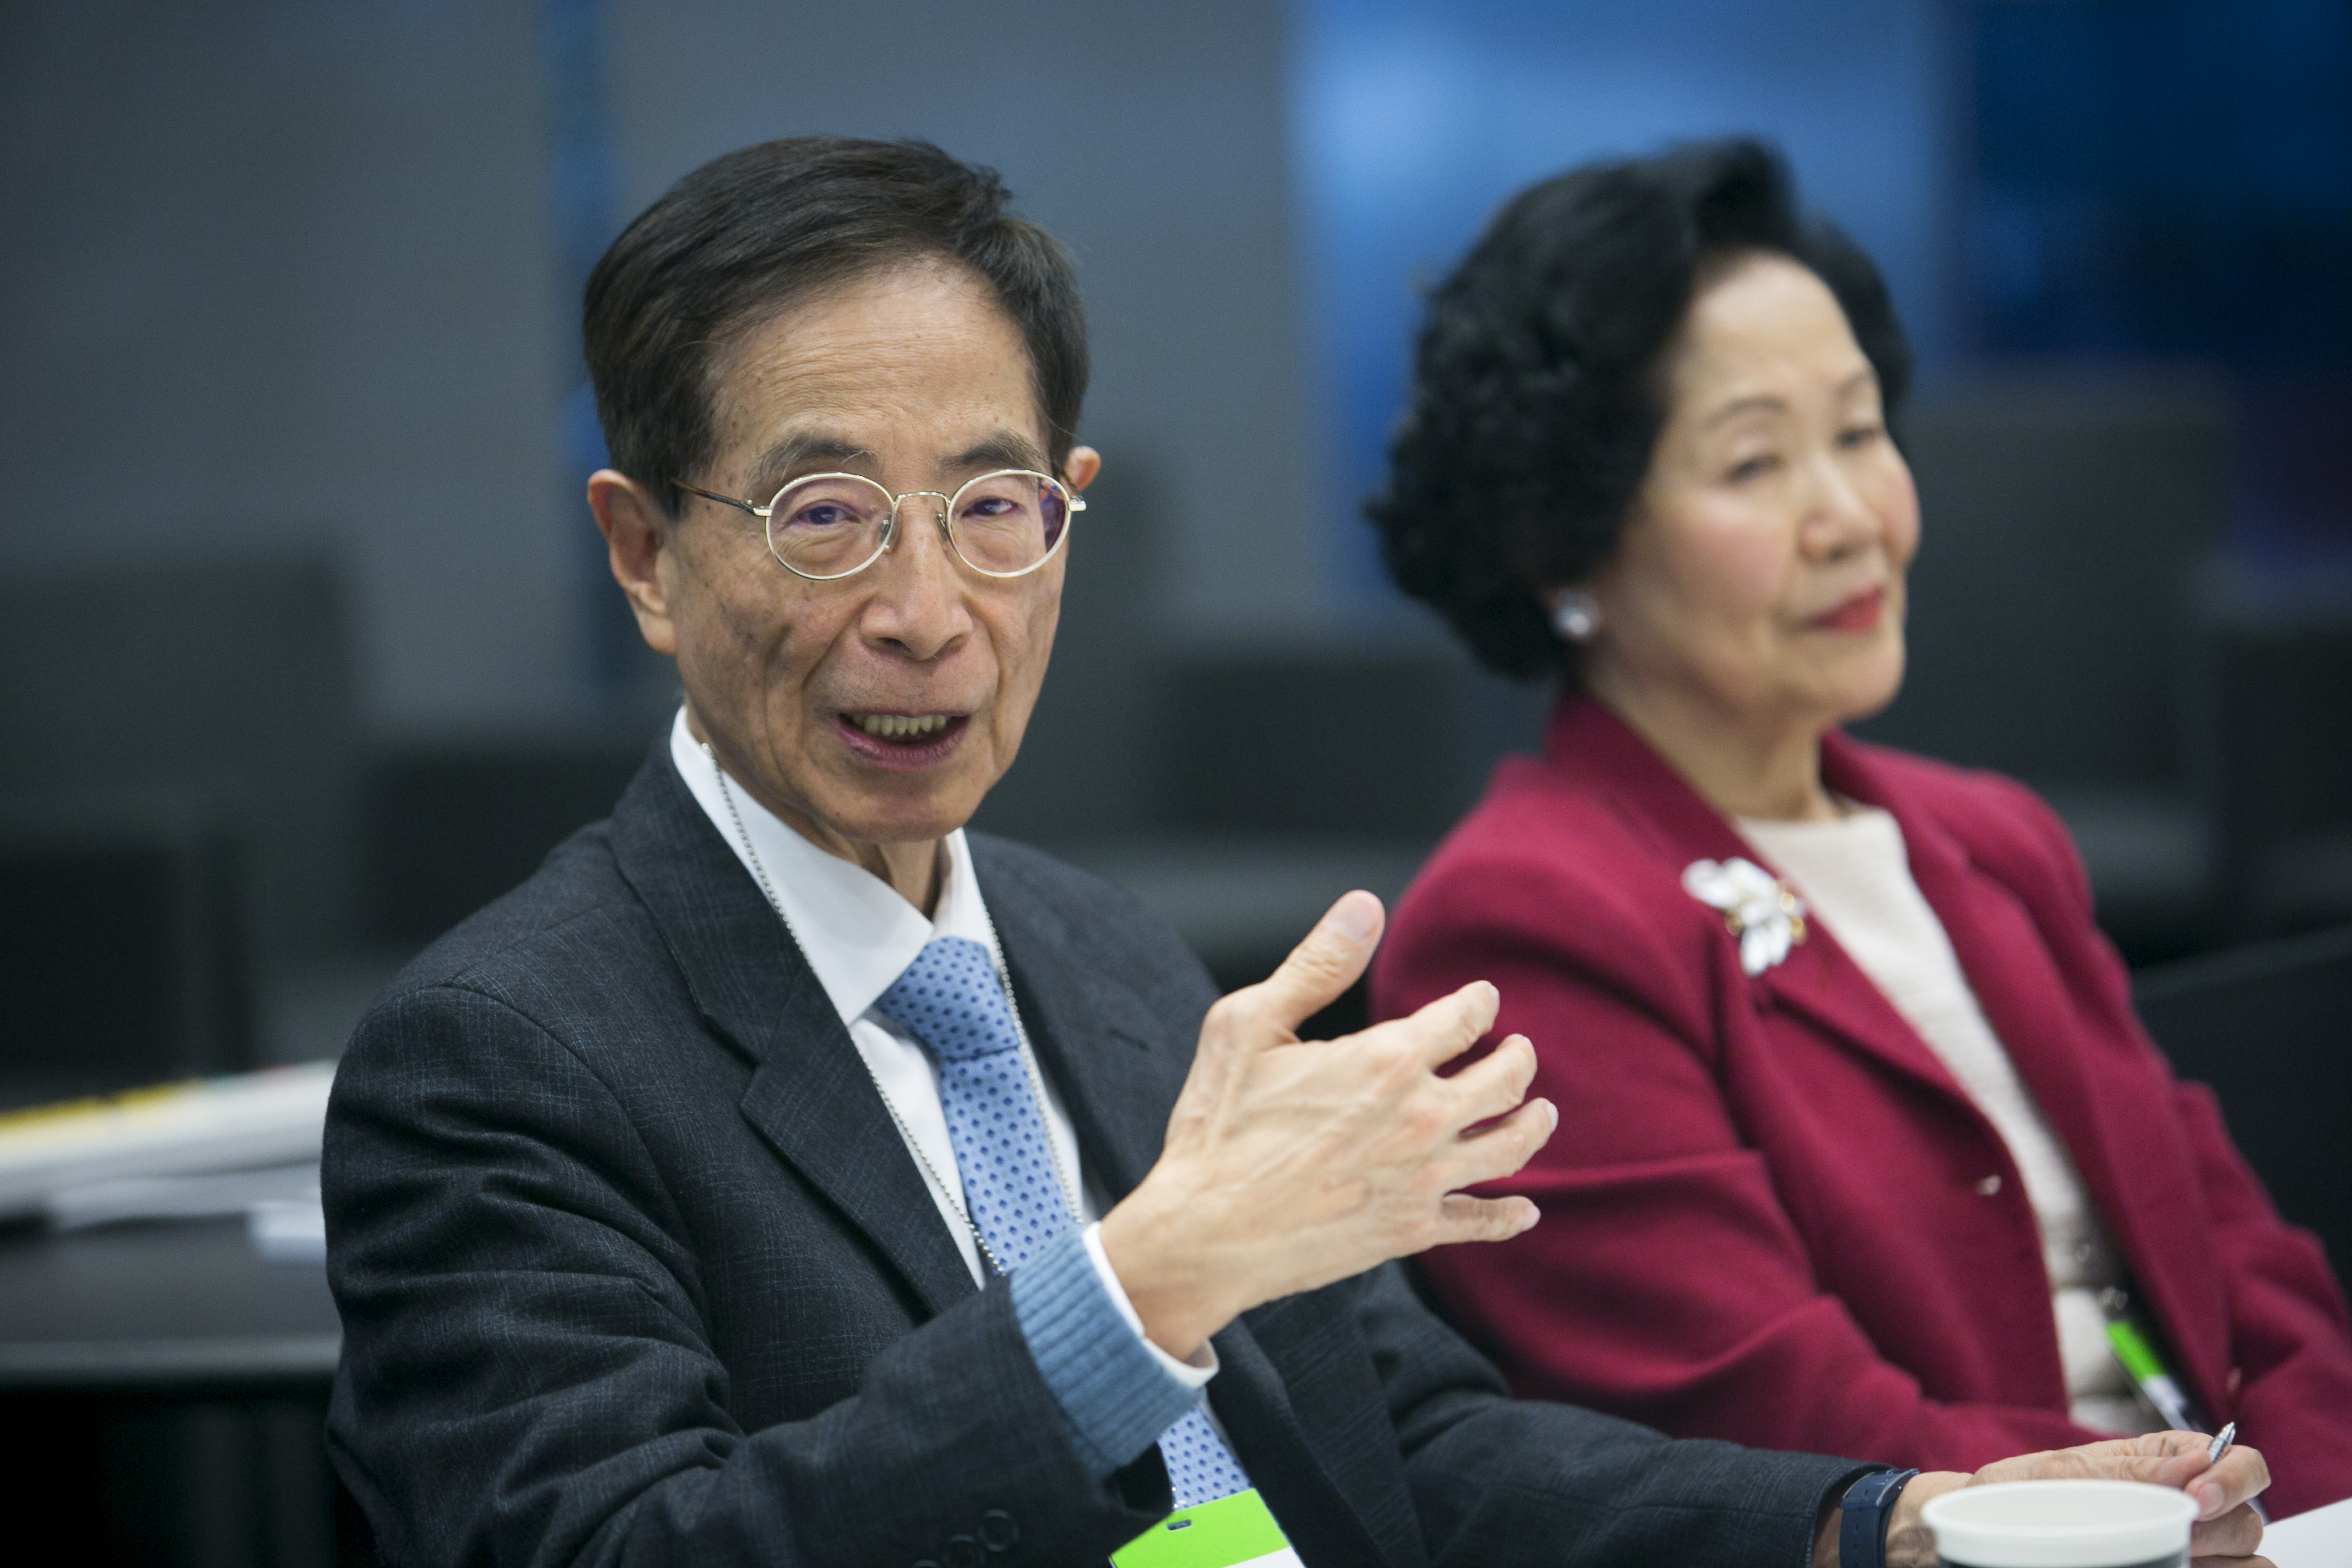 Hong Kong Political Leaders Anson Chan and Martin Lee Interview